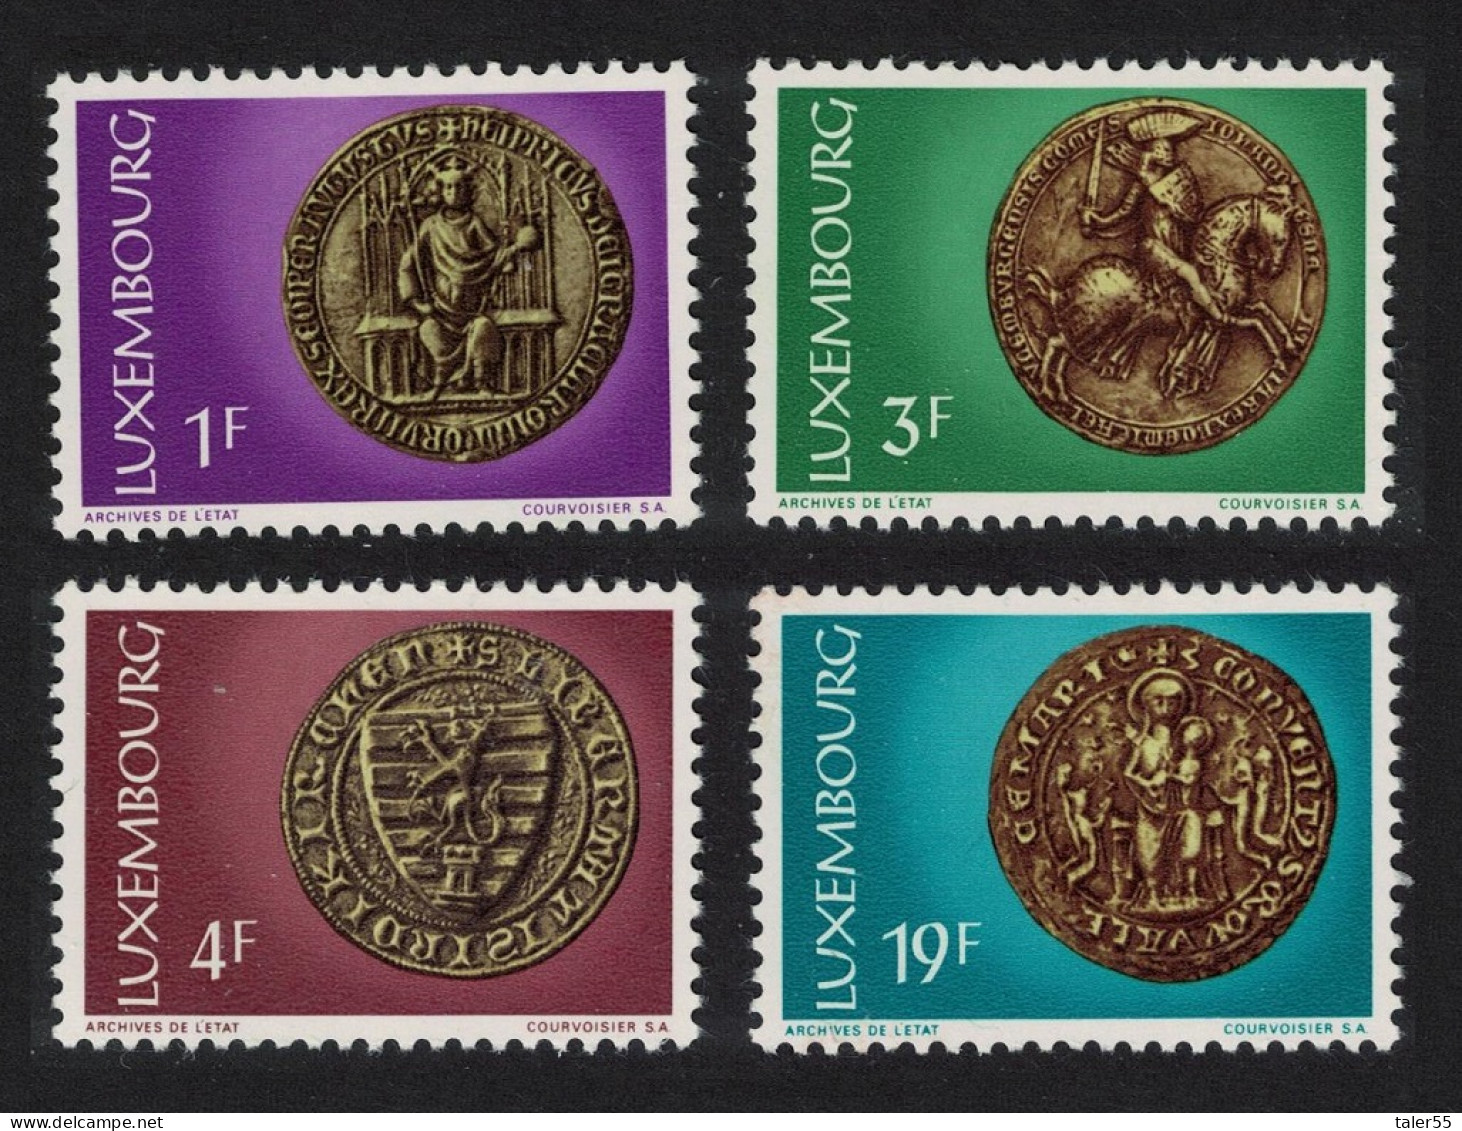 Luxembourg Seals In Luxembourg State Archives 4v 1974 MNH SG#922-925 MI#878-881 - Neufs